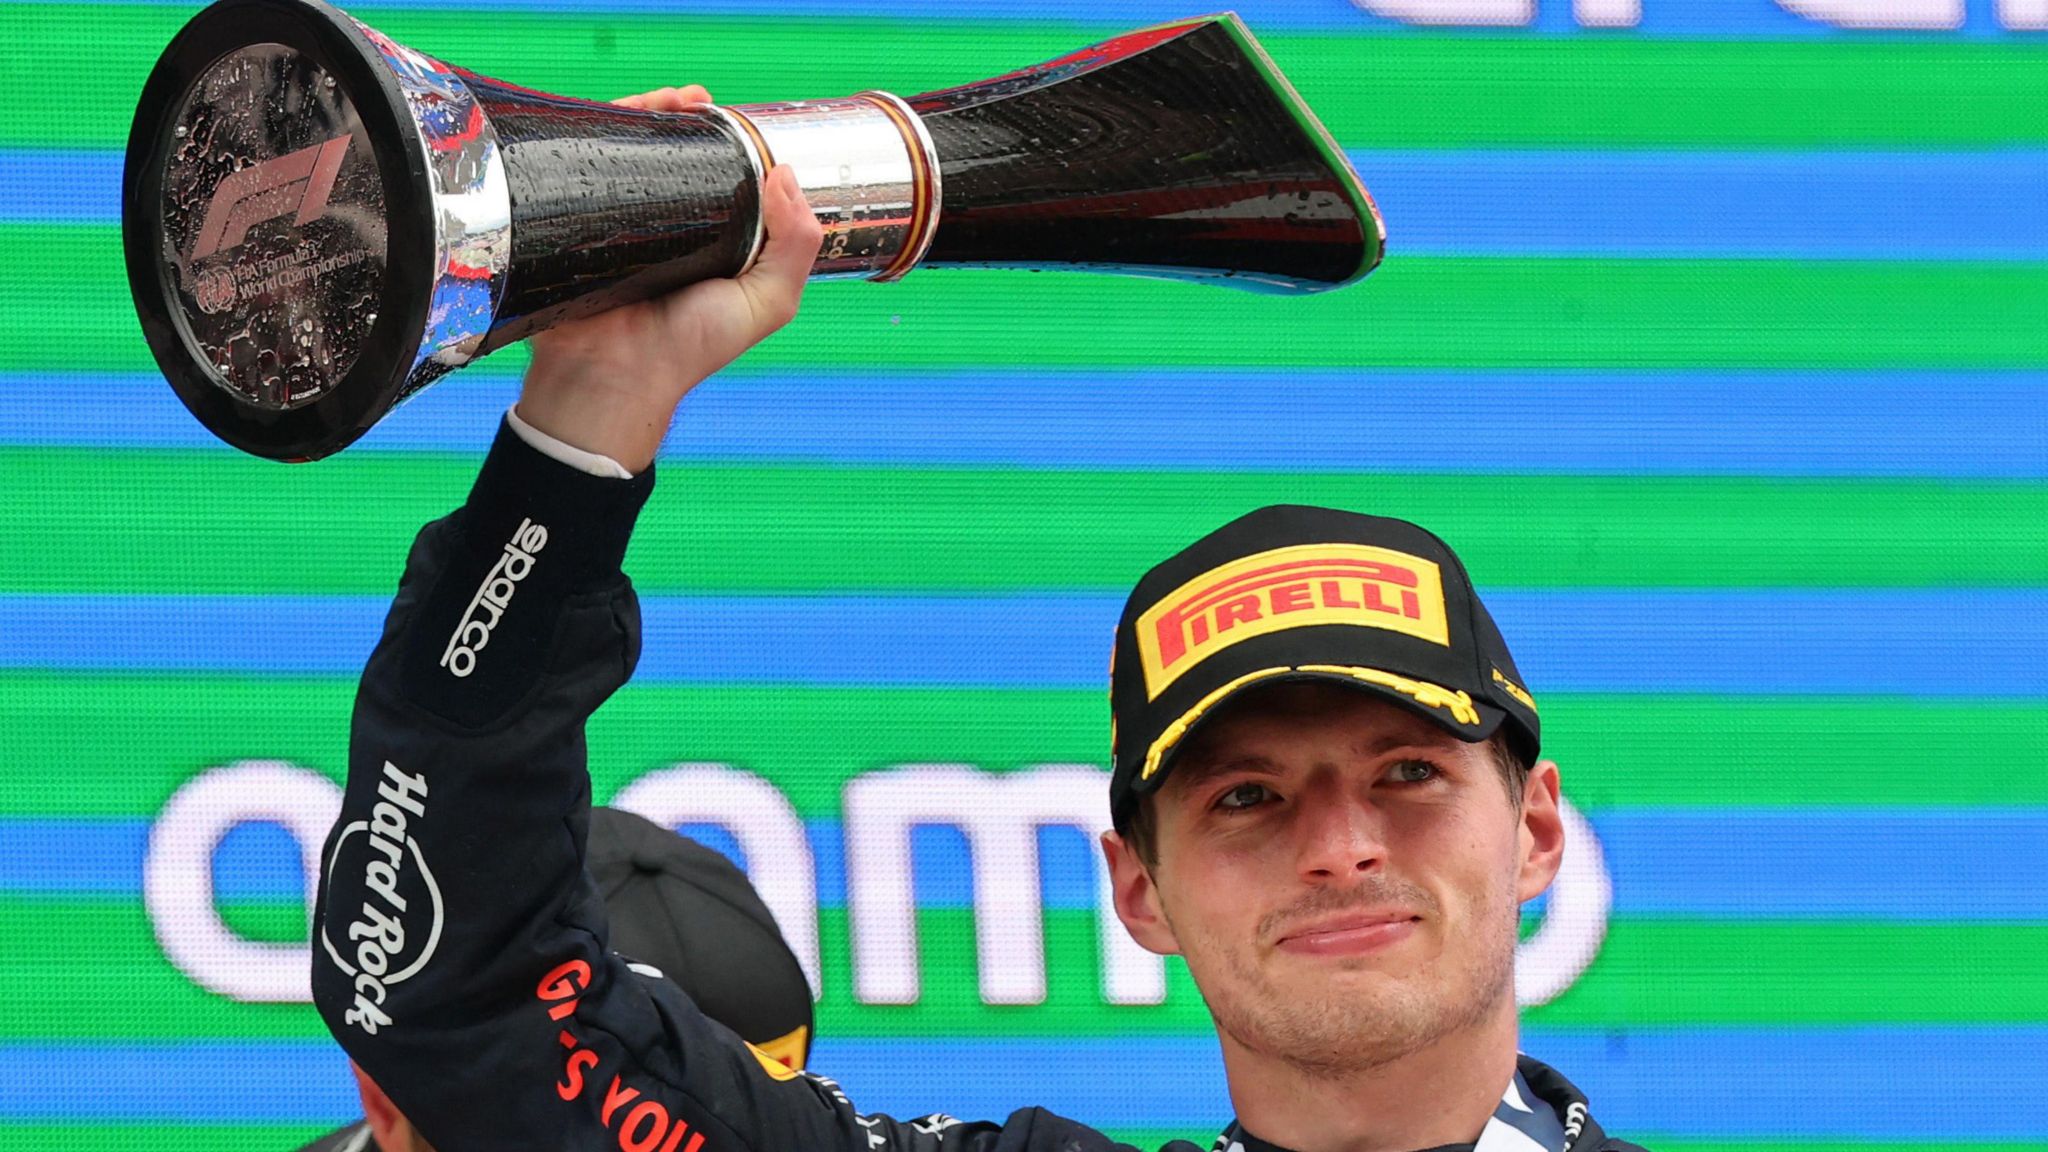 Max Verstappen holds the winner's trophy above his head after winning the Spanish Grand Prix